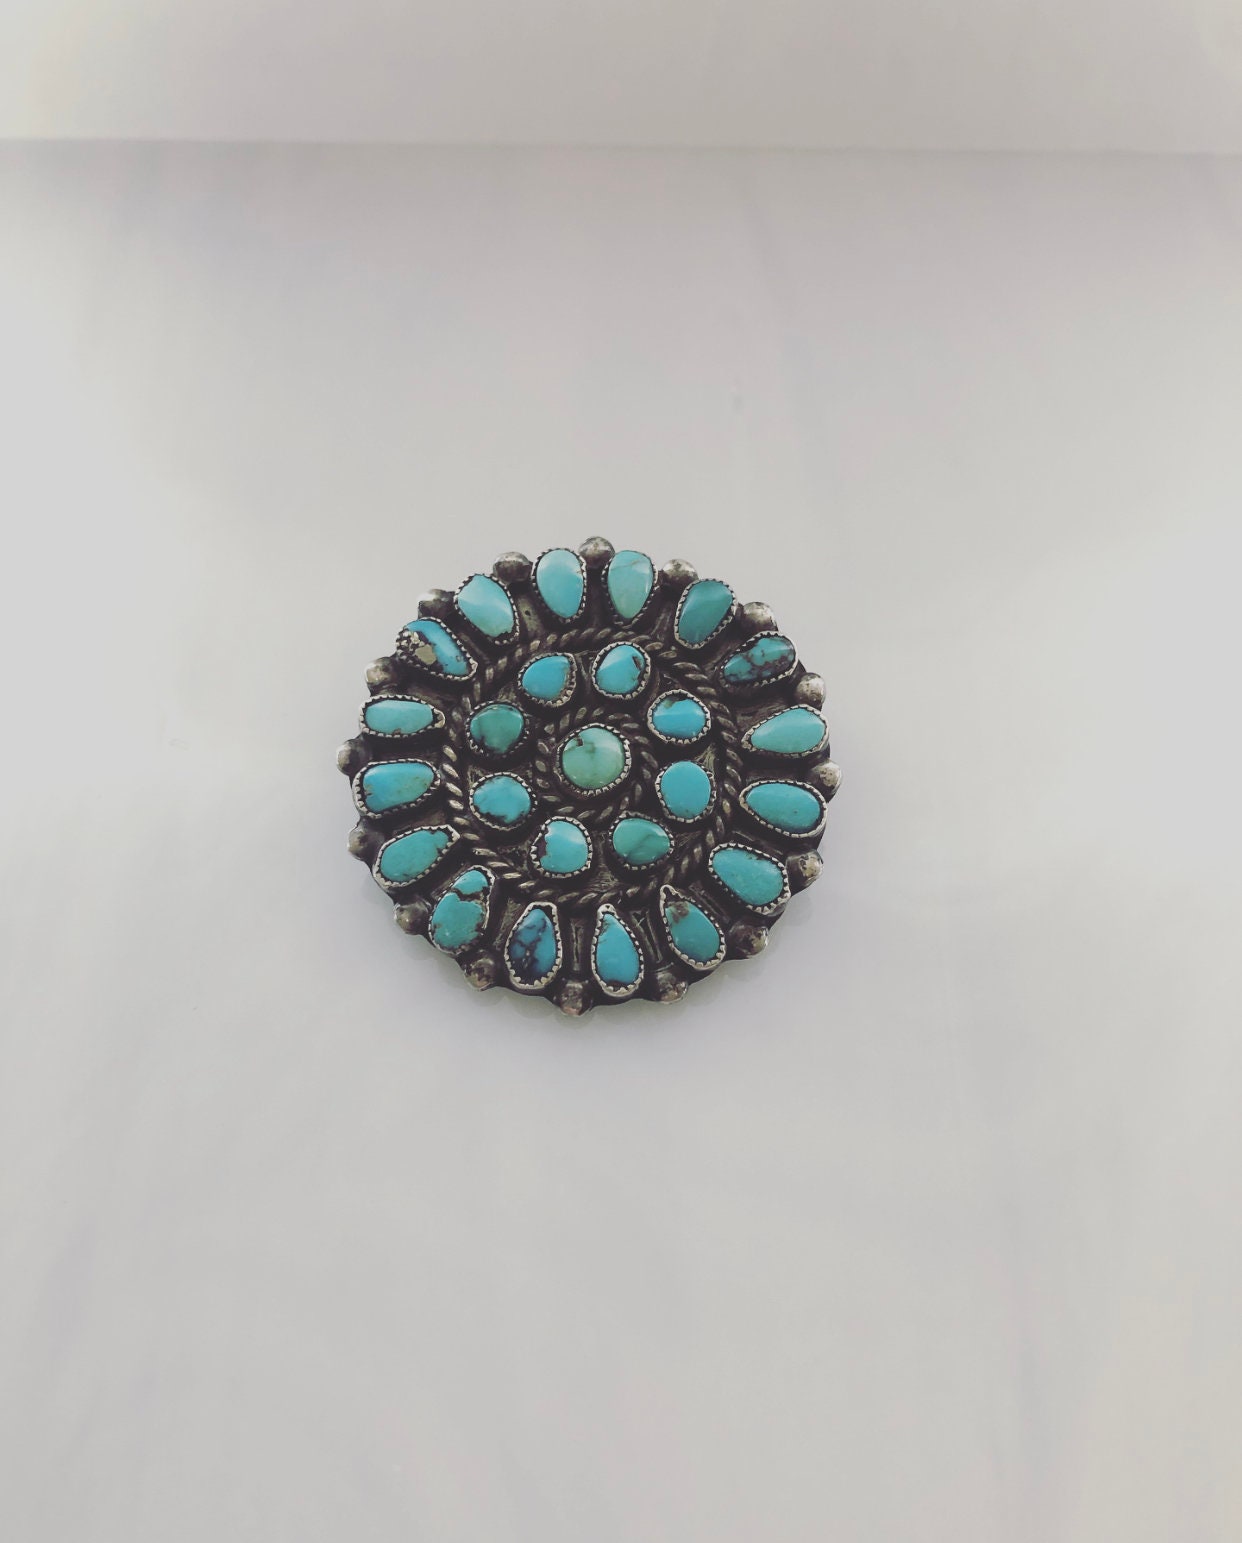 Vintage Artisan Silver and Turquoise Petit Point Cluster Pin/Brooch ...